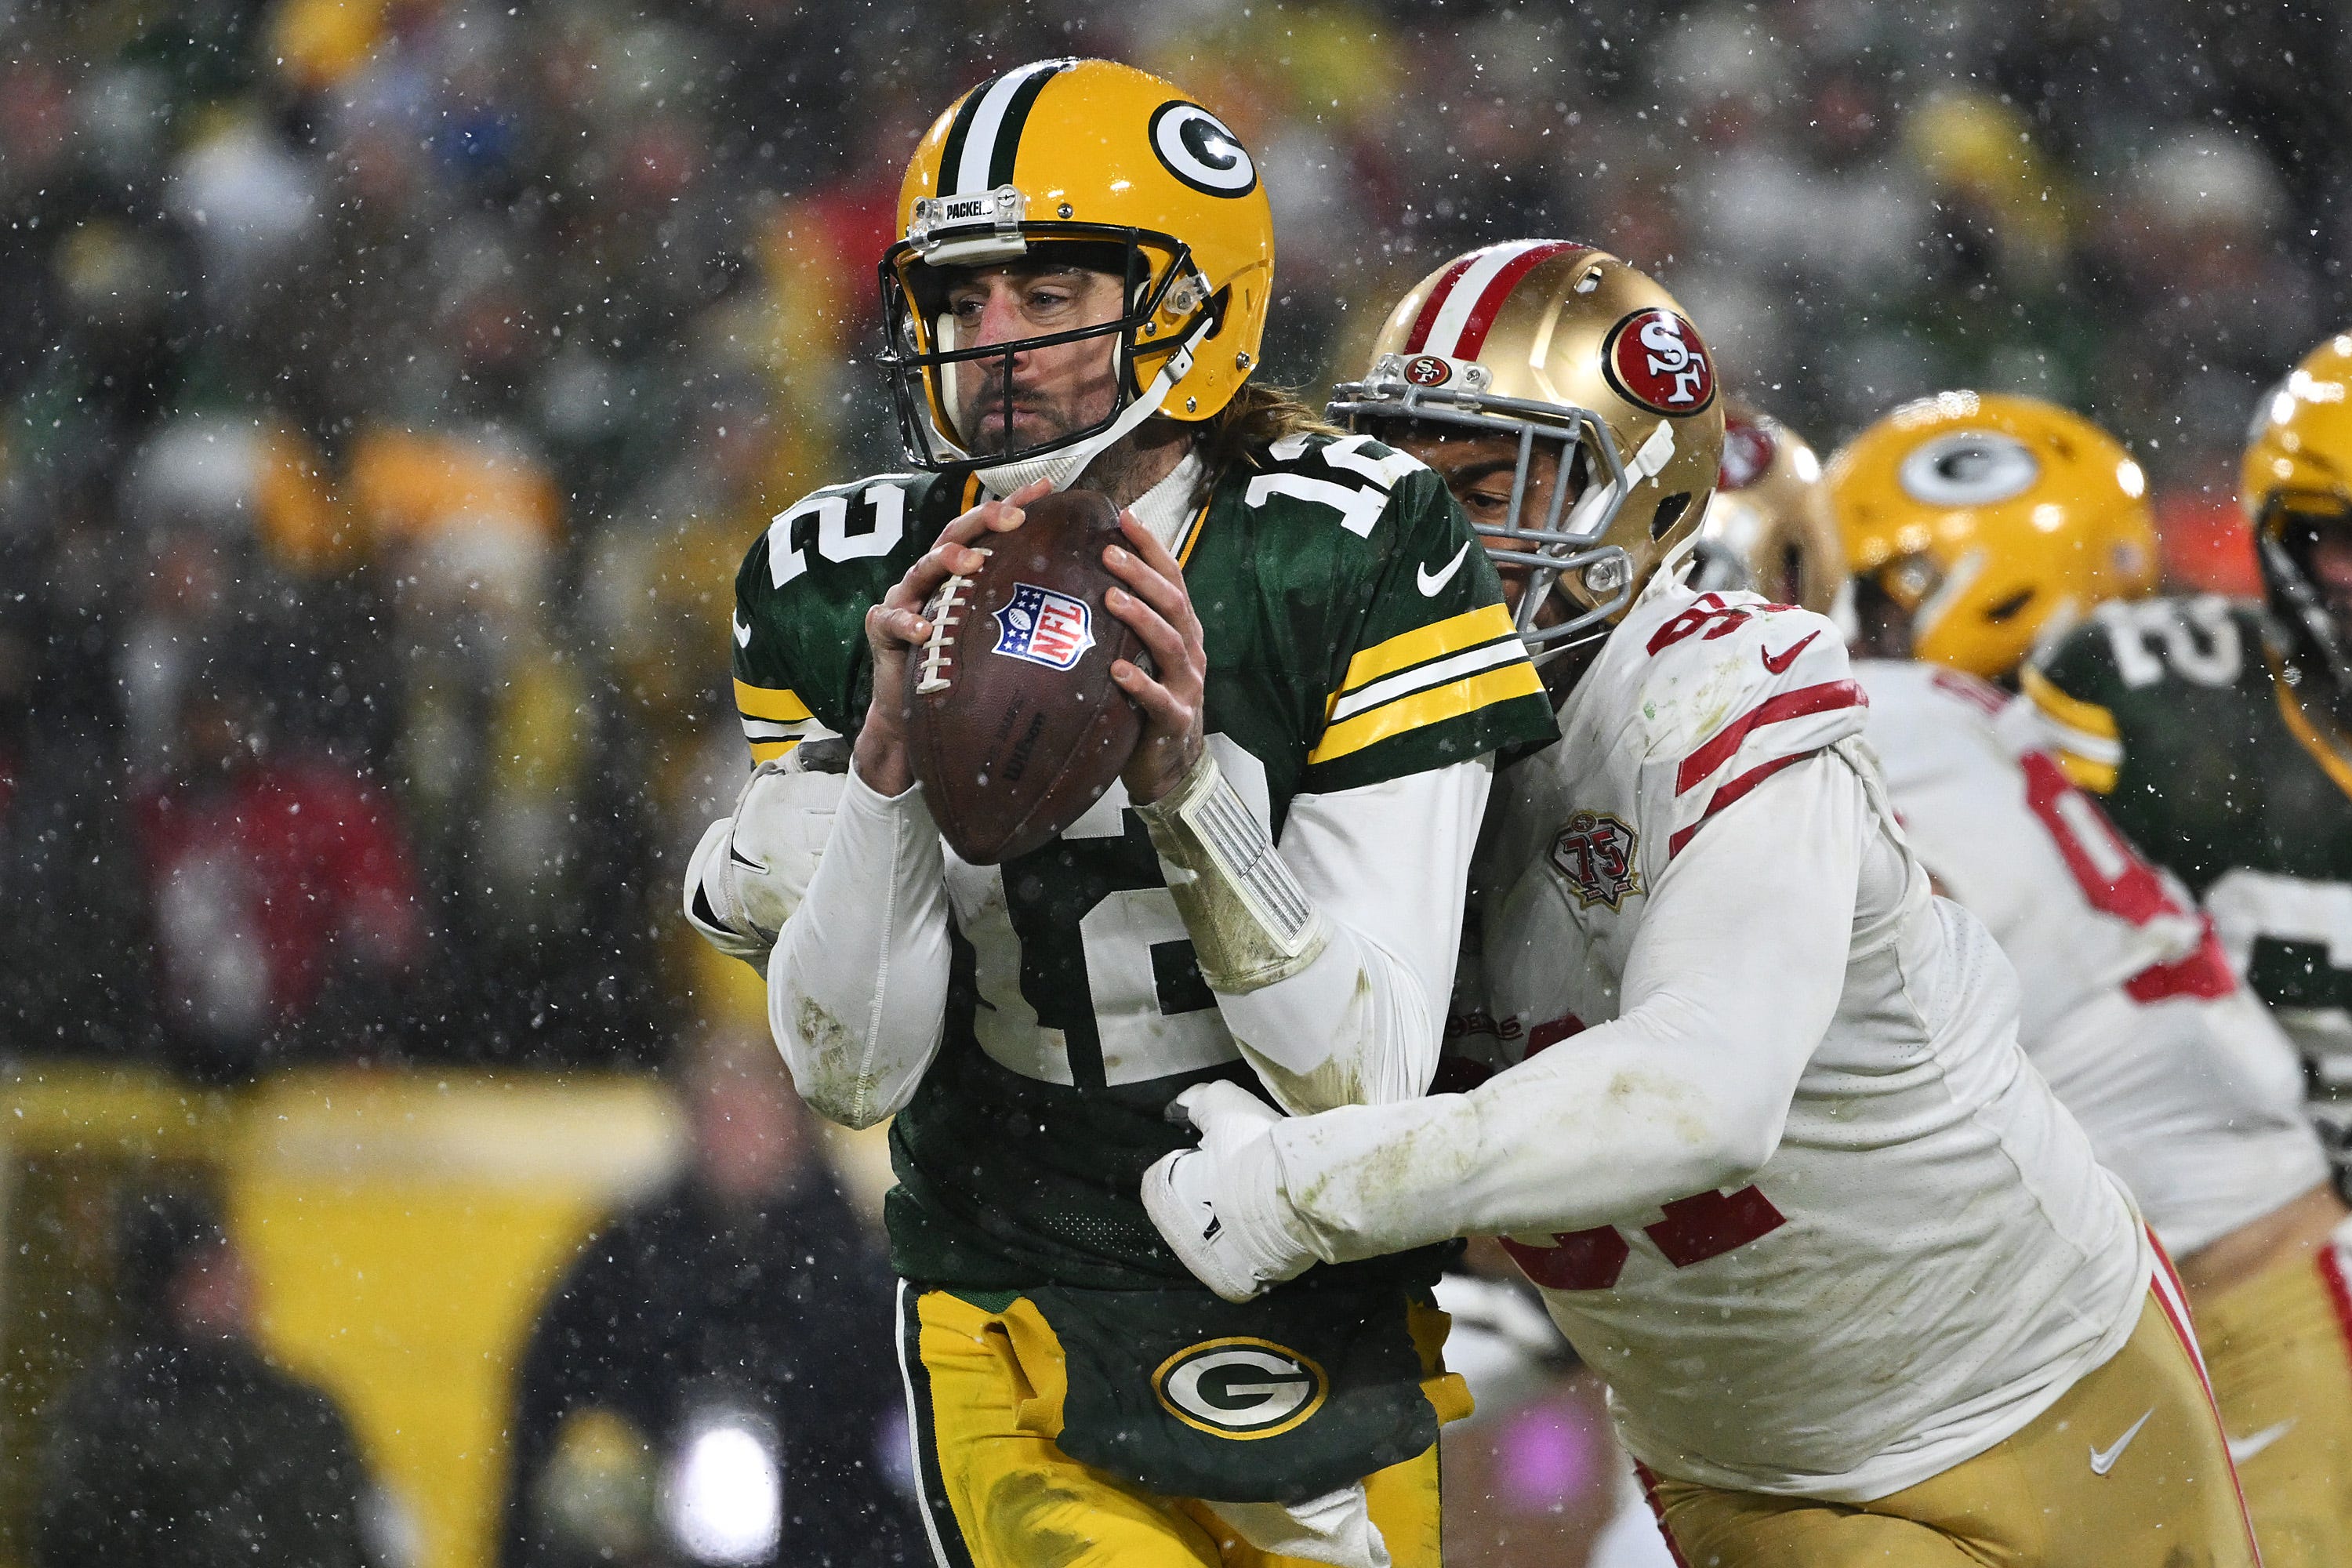 San Francisco 49ers defensive end Arik Armstead (91) sacks Green Bay Packers quarterback Aaron Rodgers (12) late in the fourth quarter during their NFL divisional round football playoff game Saturday January 22, 2022, at Lambeau Field in Green Bay, Wis. Dan Powers/USA TODAY NETWORK-Wisconsin 